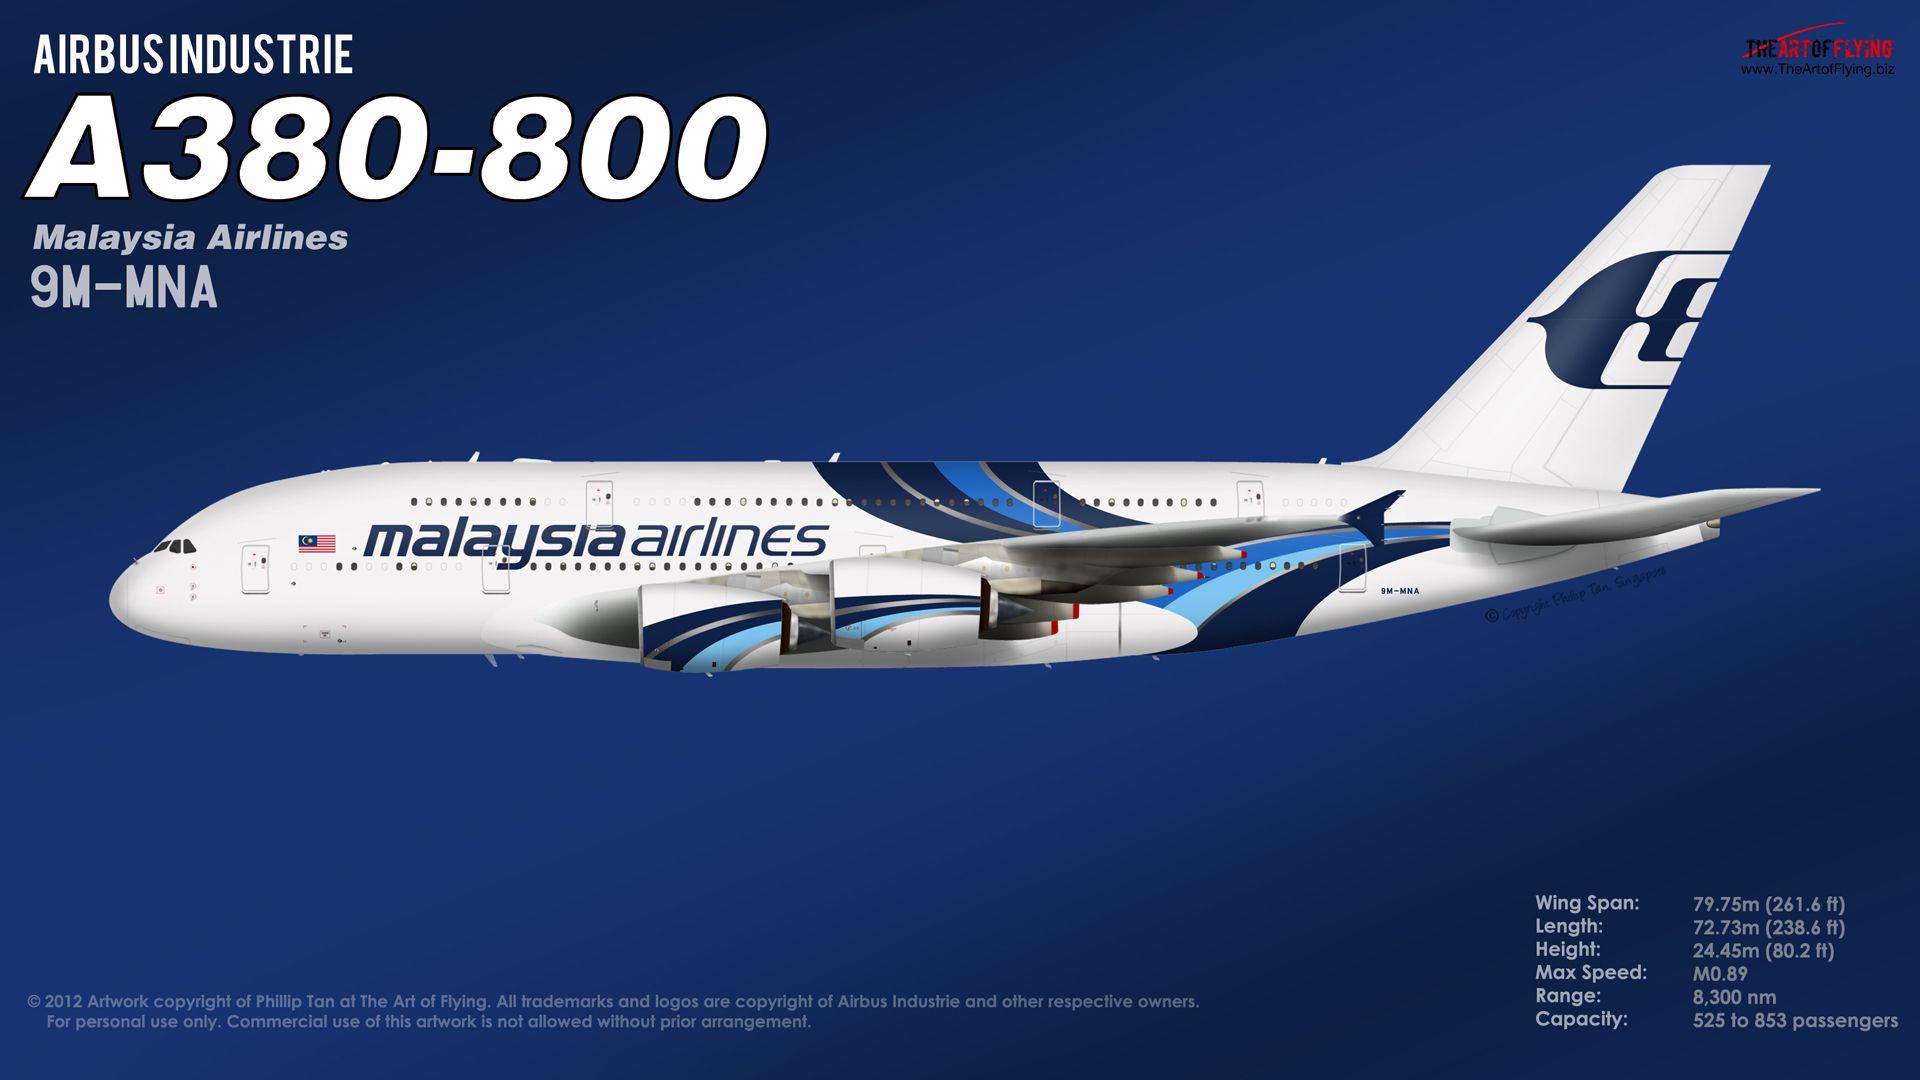 Malaysia Airlines Wallpaper, Malaysia Airlines Background for PC